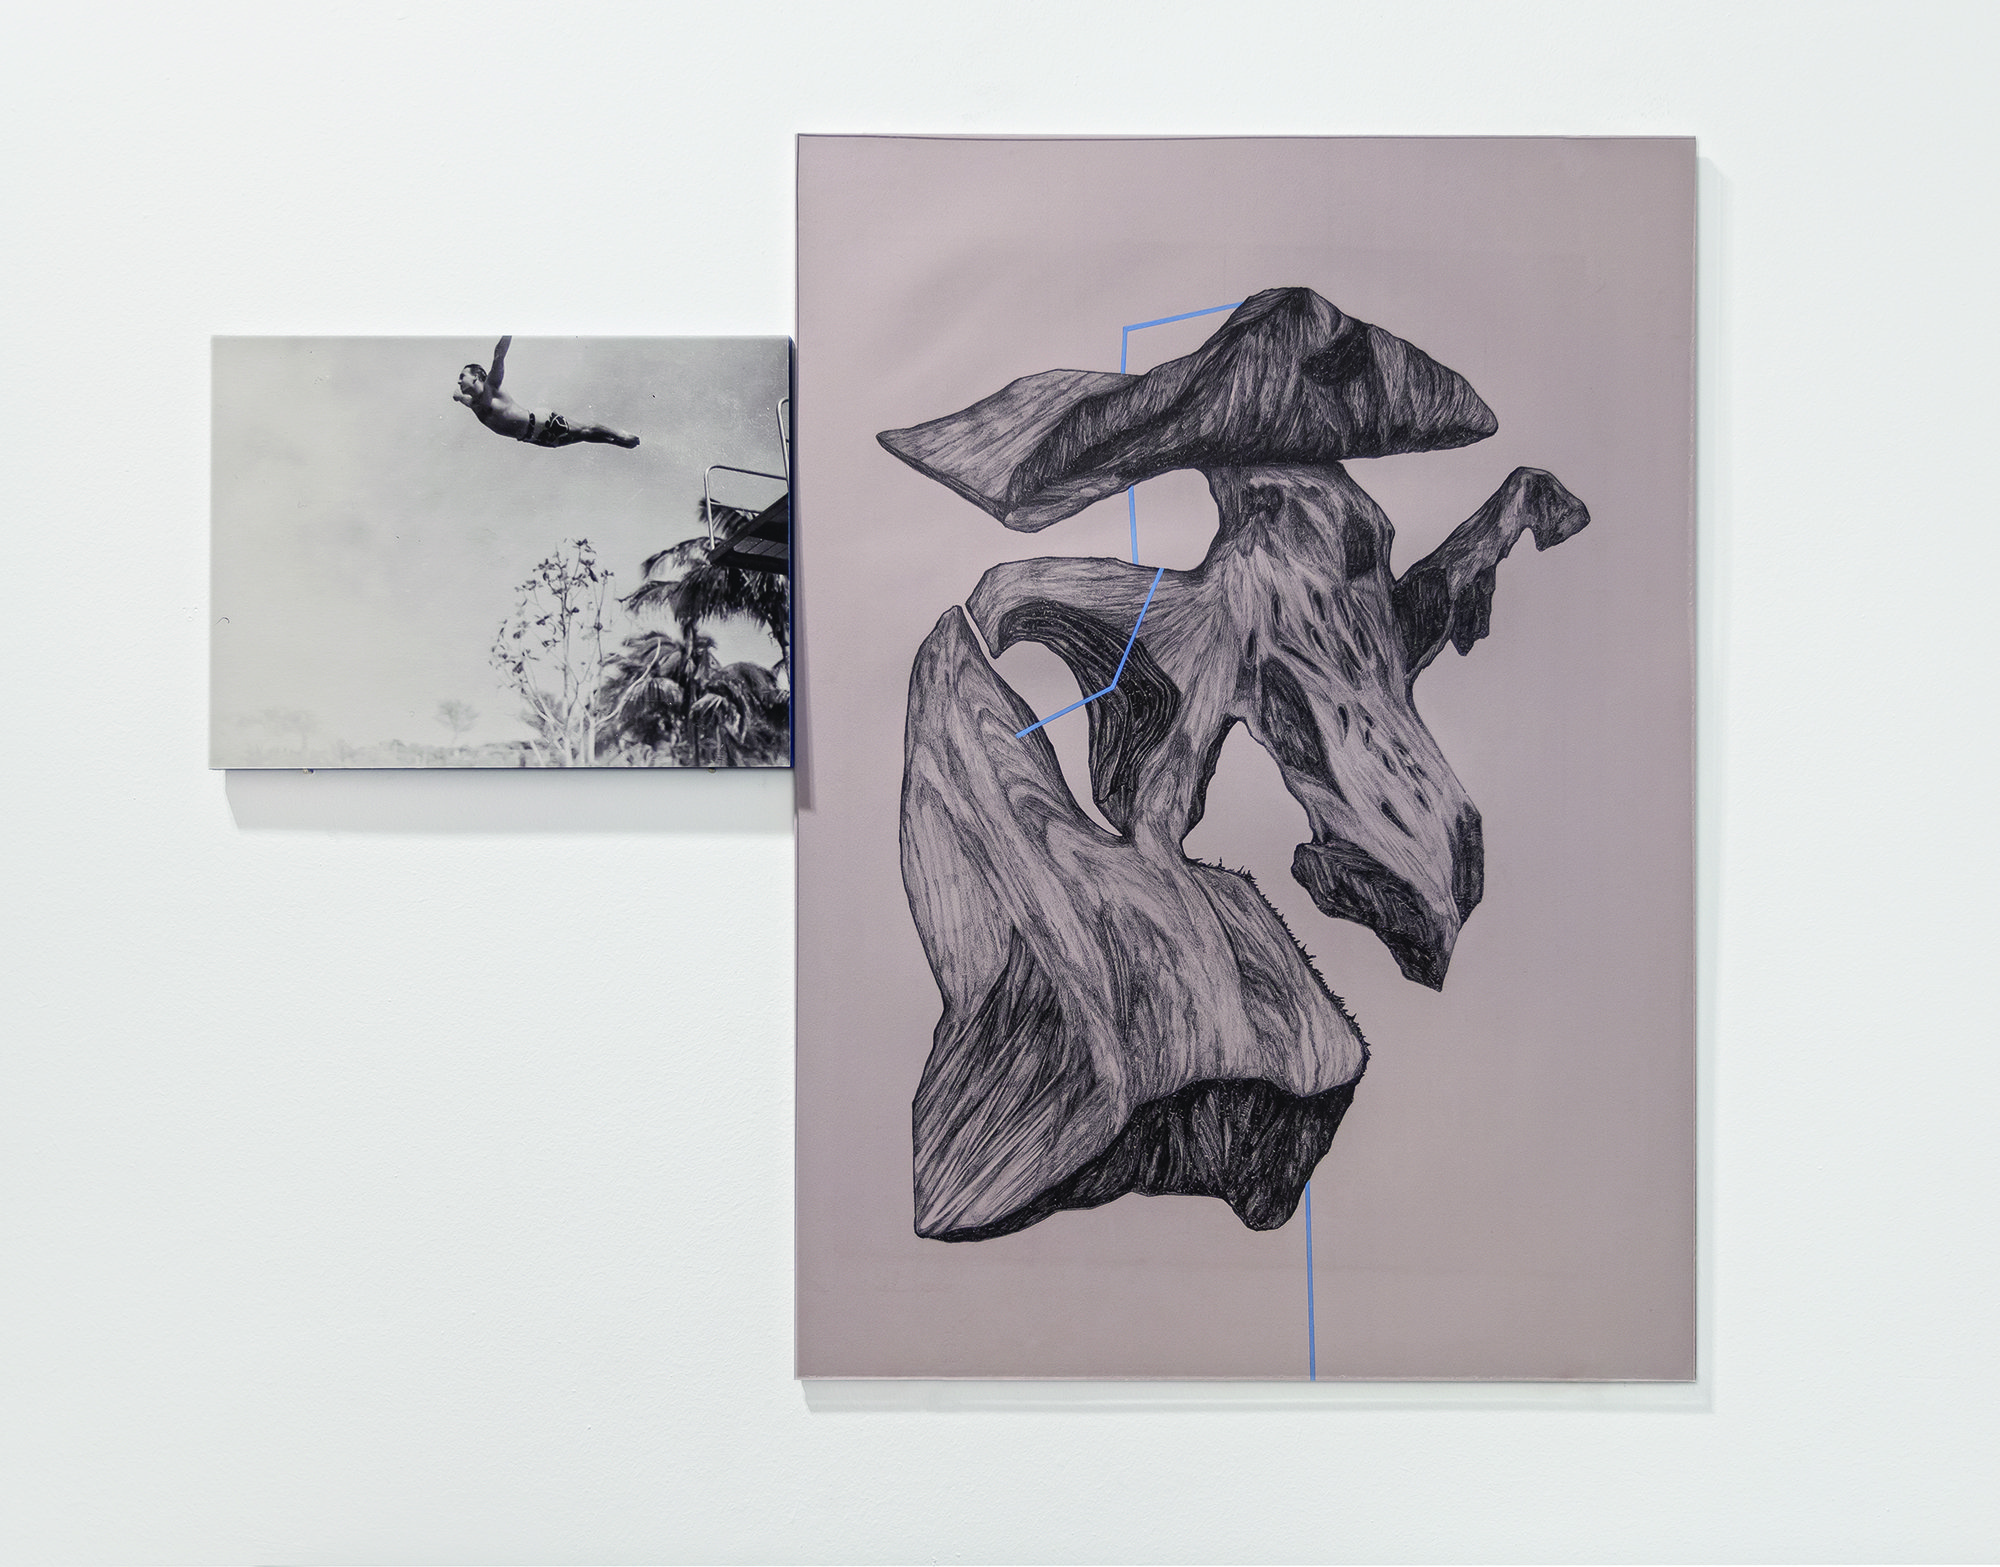 Emre Hüner, Diamond Head, Diving Man, diptych: lithography on silkscreen print on photograph on wooden panel, 68.2 x 49.5 cm &amp; 32.8 x 23.7 cm (26 7/8 x 19 1/2 in &amp; 12 7/8 x 9 3/8 in), 2013